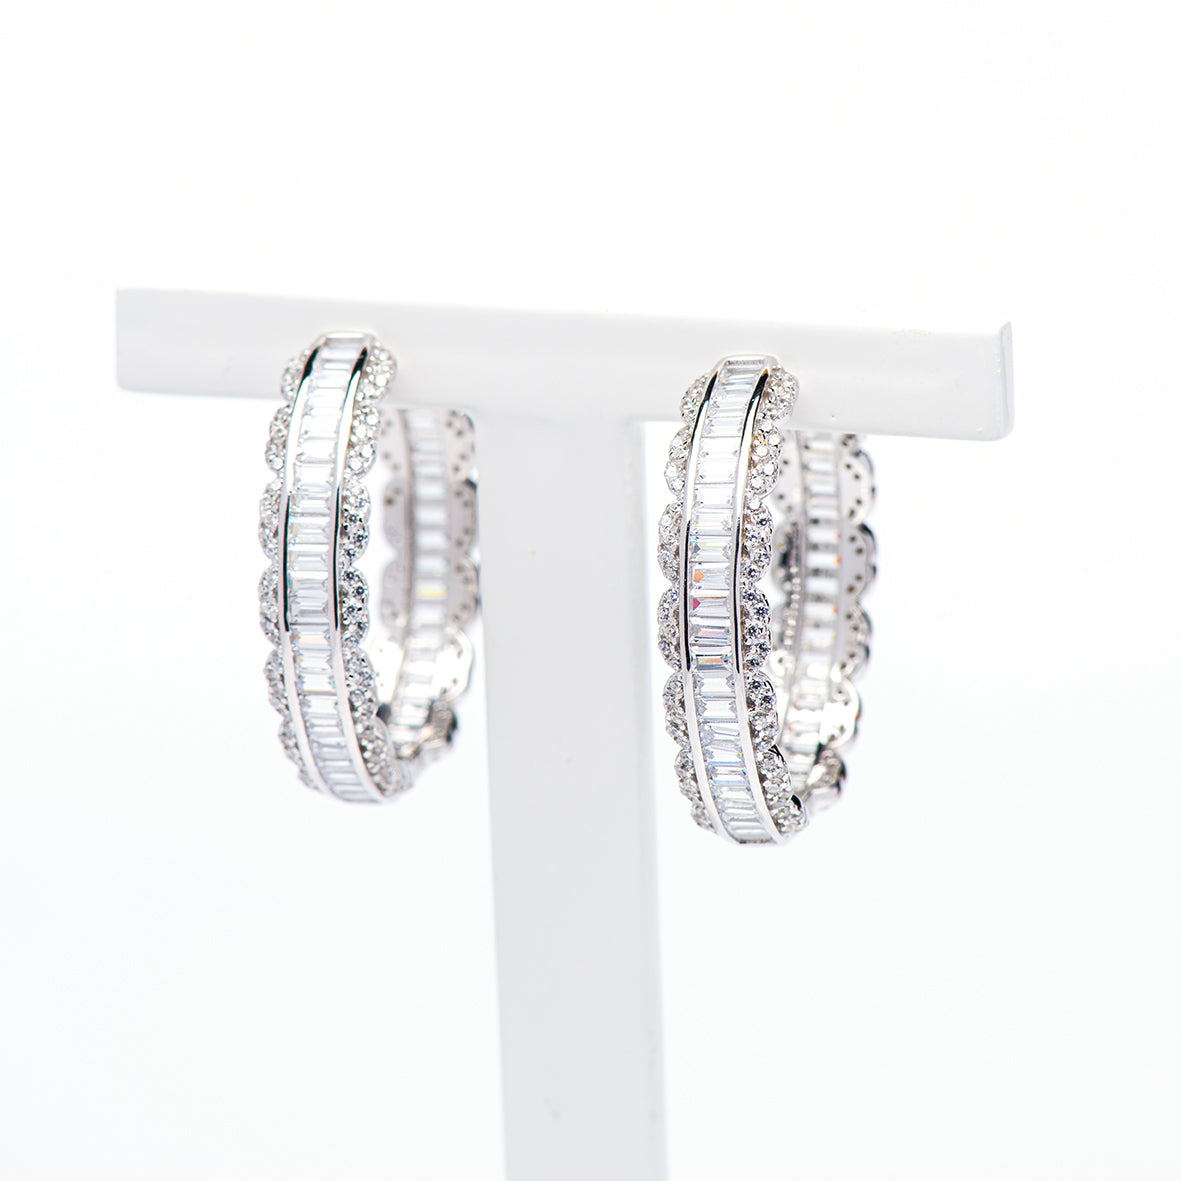 DK-925-088 silver hoops with security Clasp